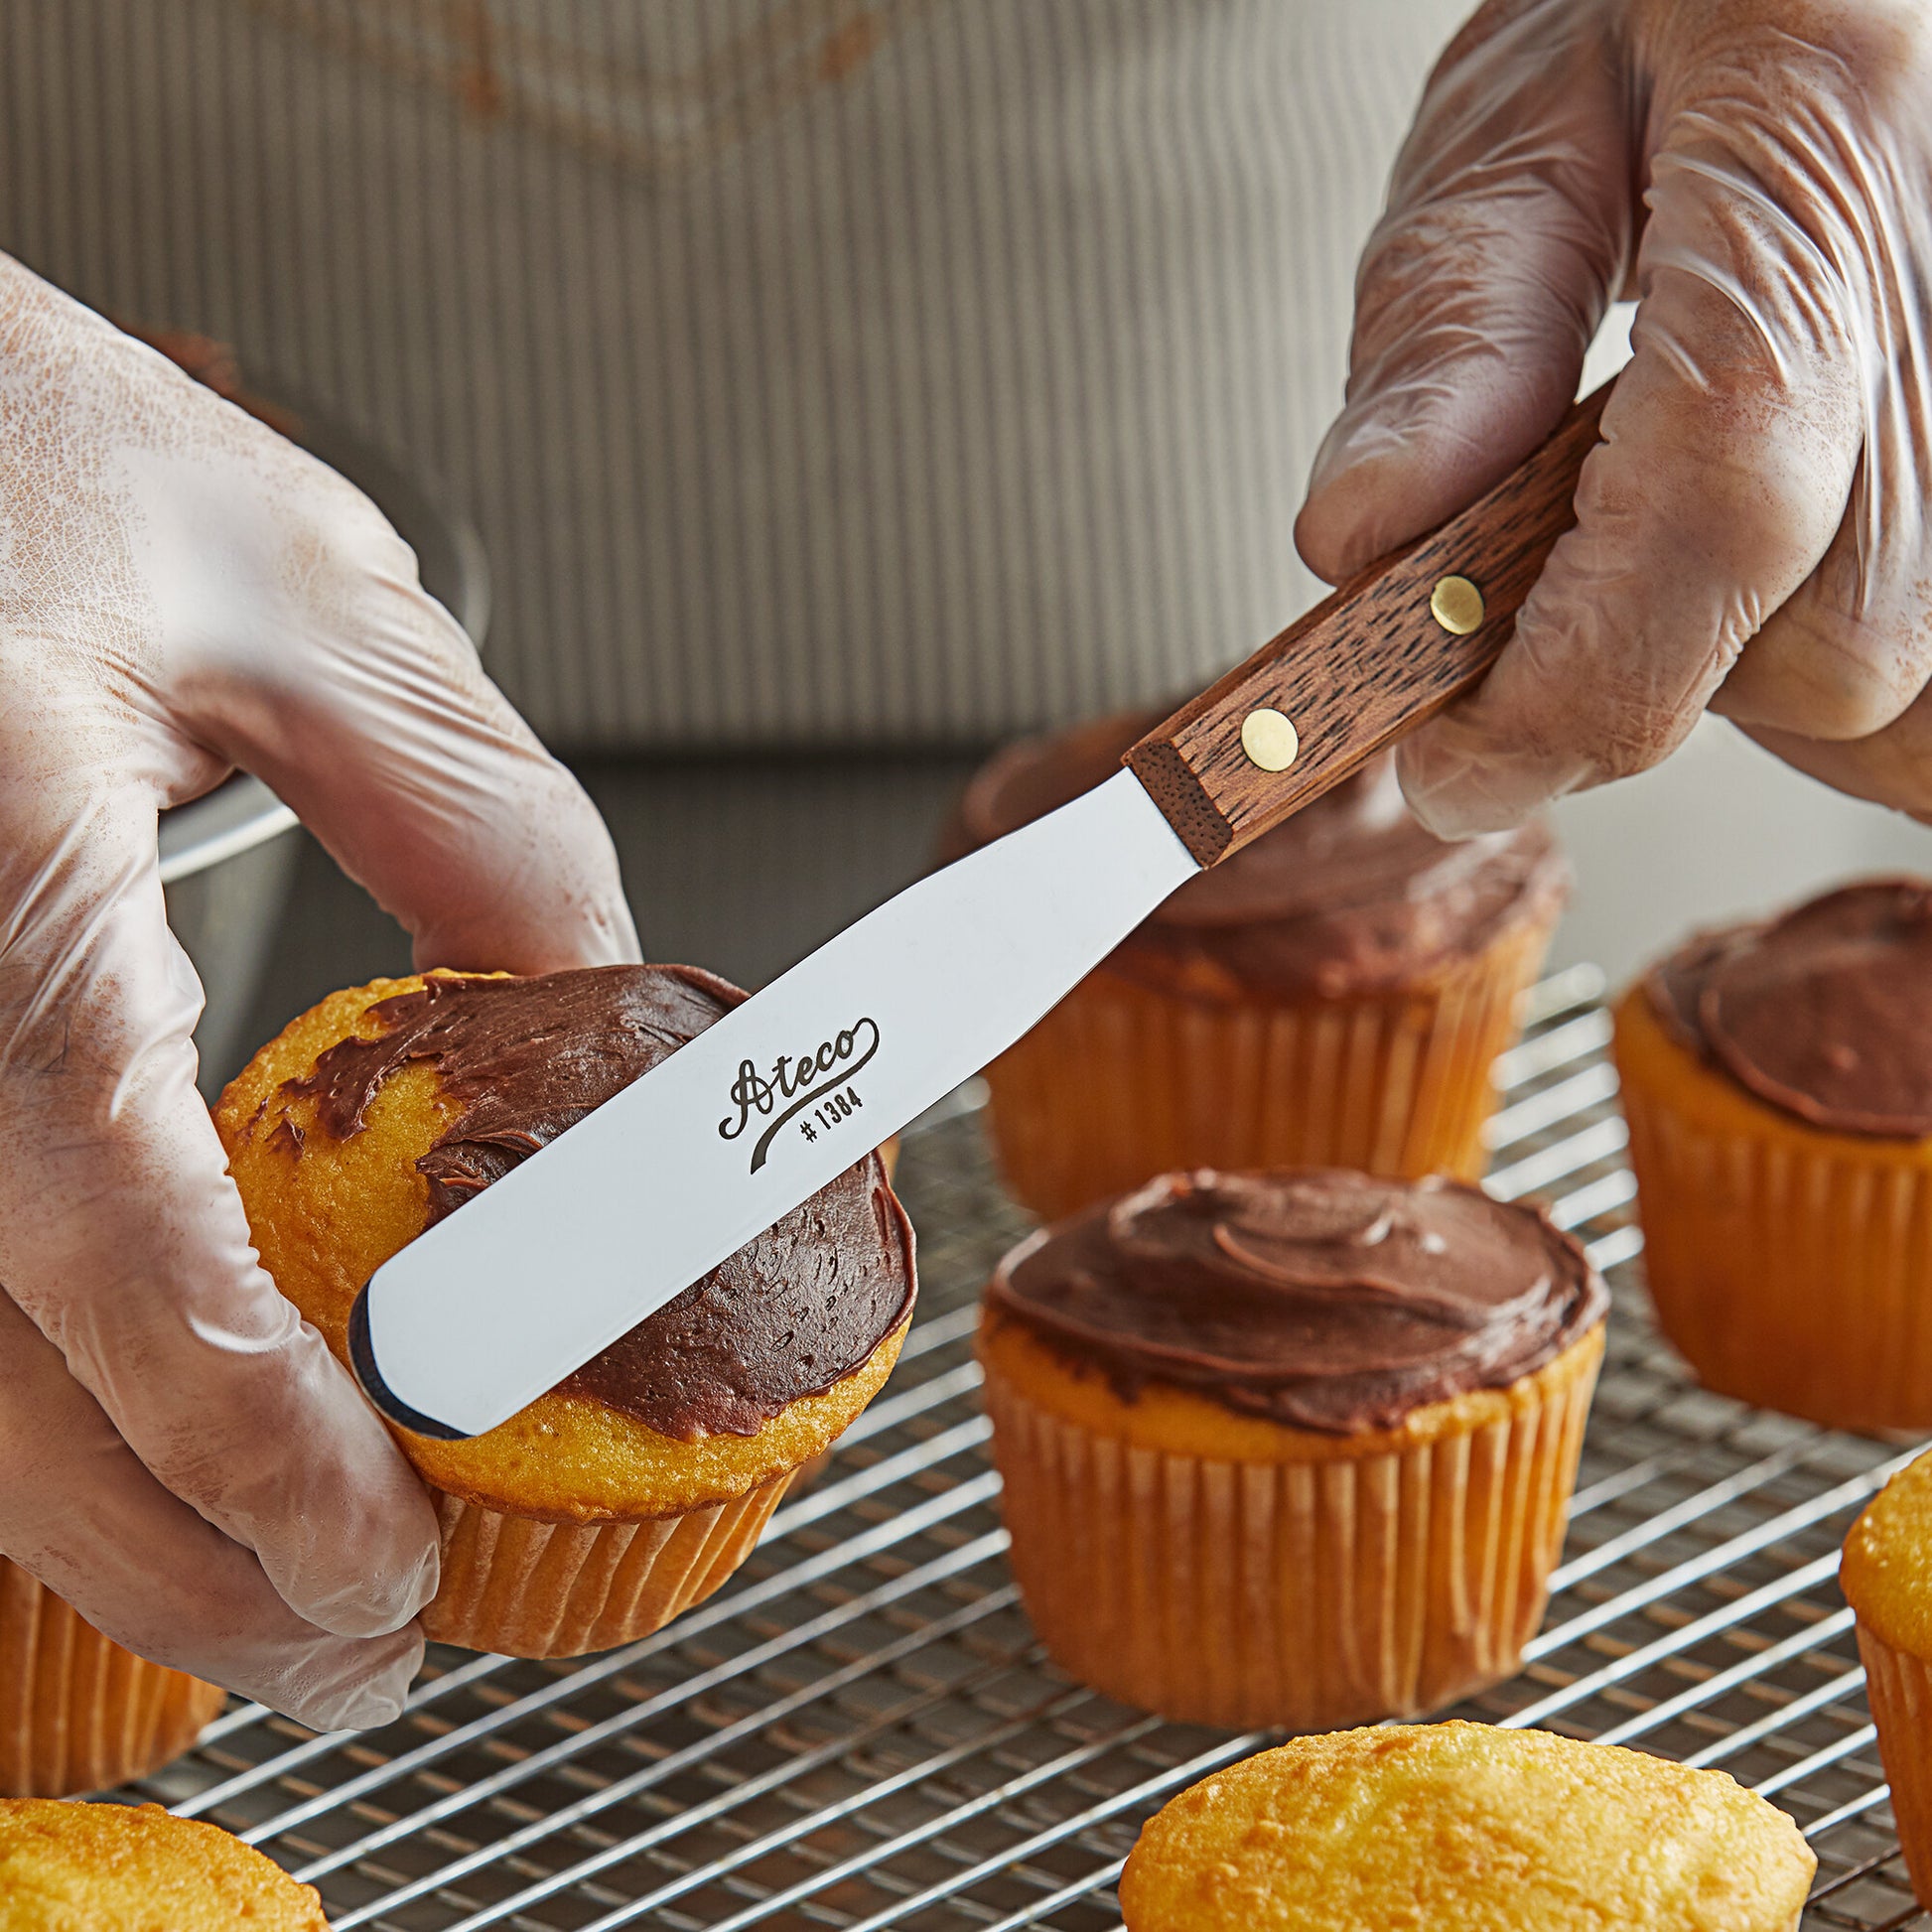 illustration of the wooden handle icing spatula icing a batch of cupcakes with a person in the background